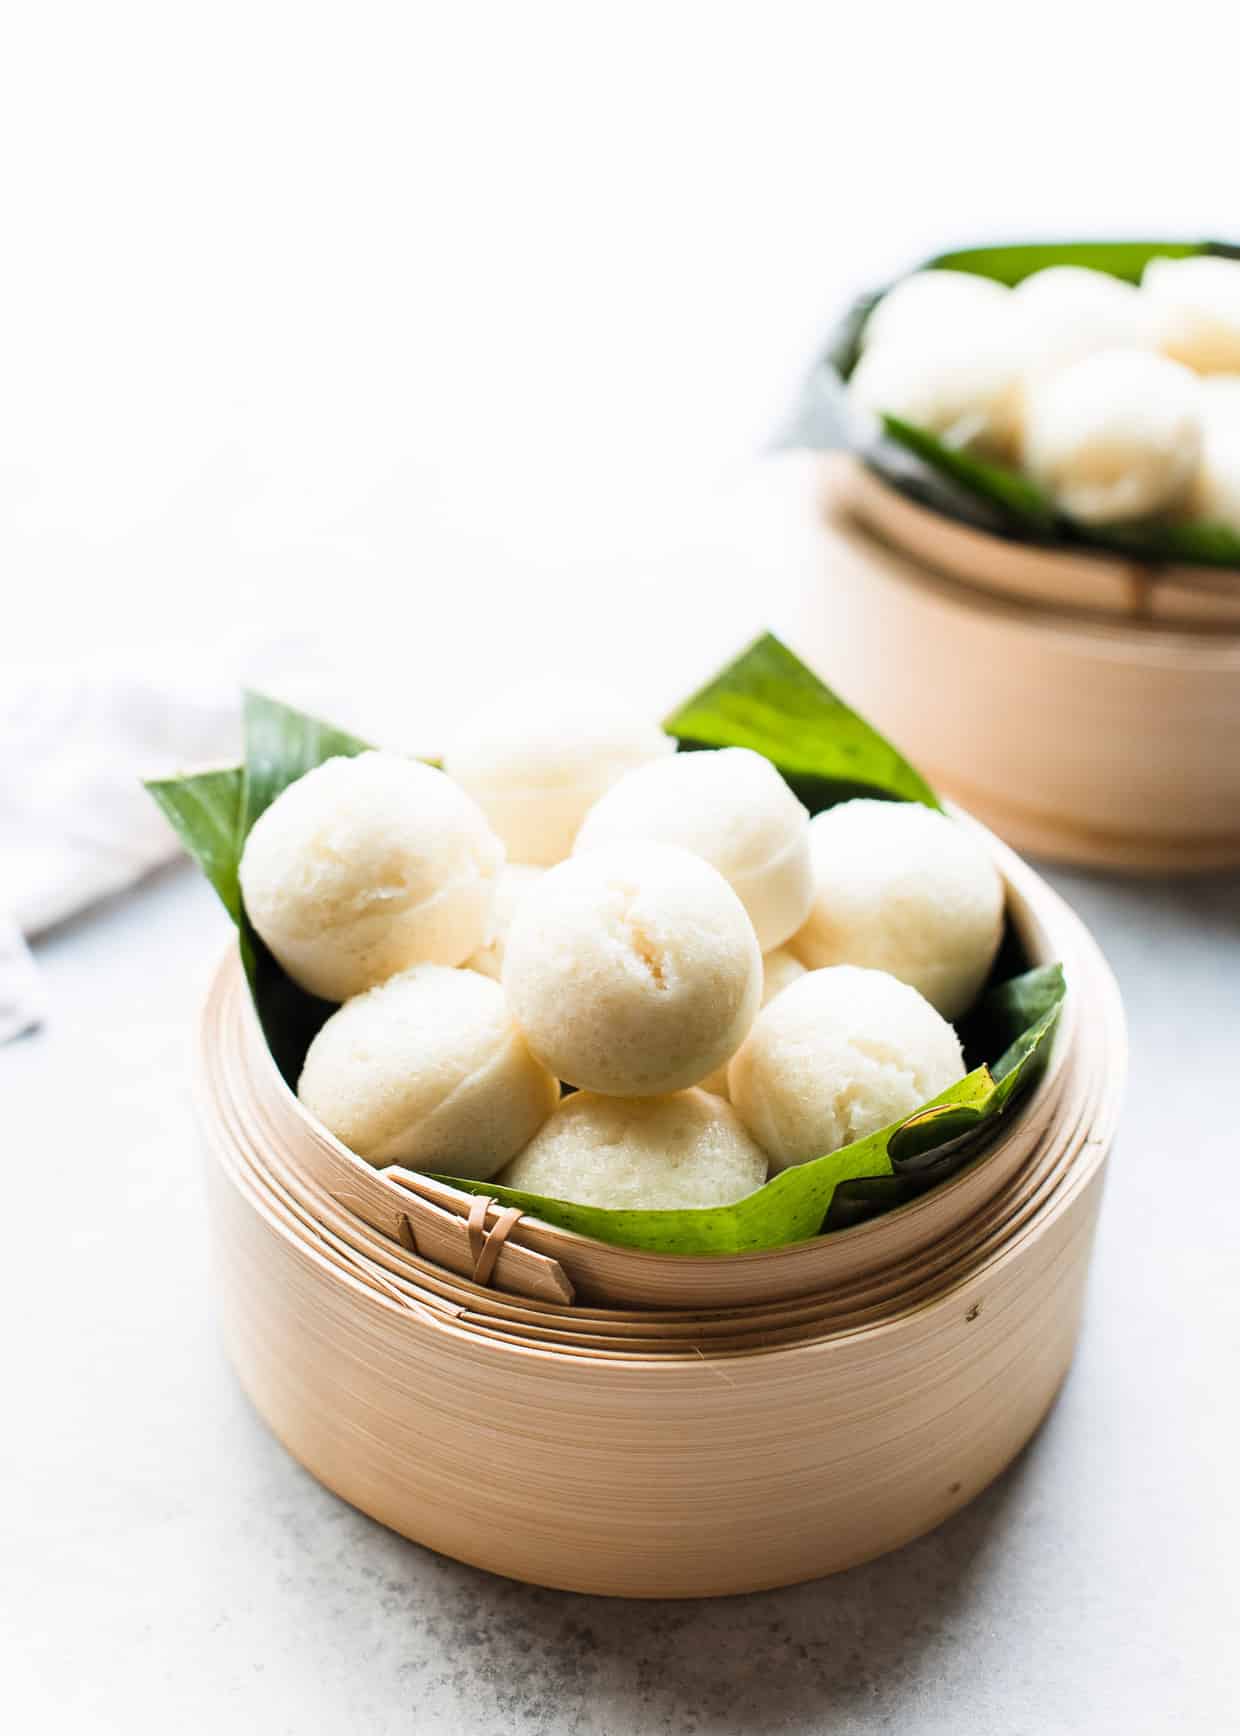 Mini steamed rice cakes, or puto, in a bamboo steamer.